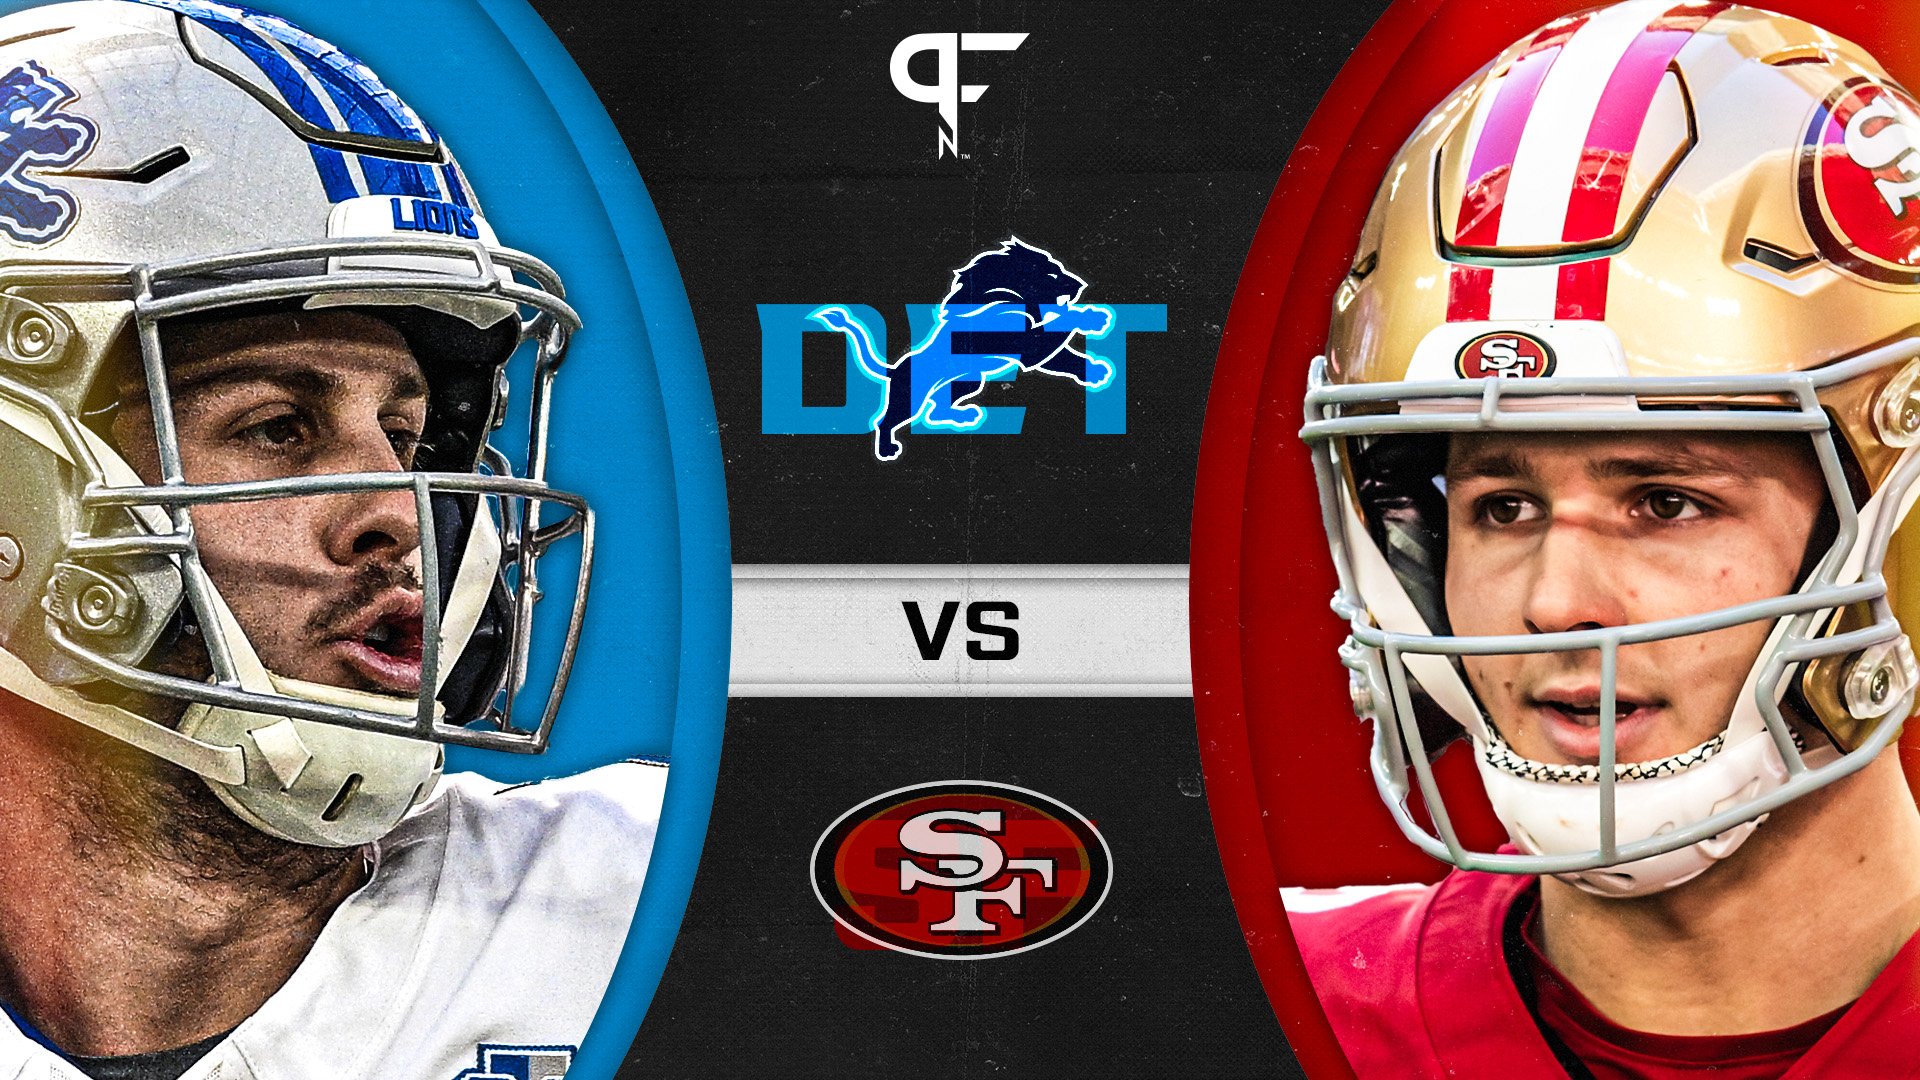 Lions vs. 49ers Predictions and Expert Picks for the NFC Championship: Will Jared Goff or Brock Purdy Lead Their Team to Victory?